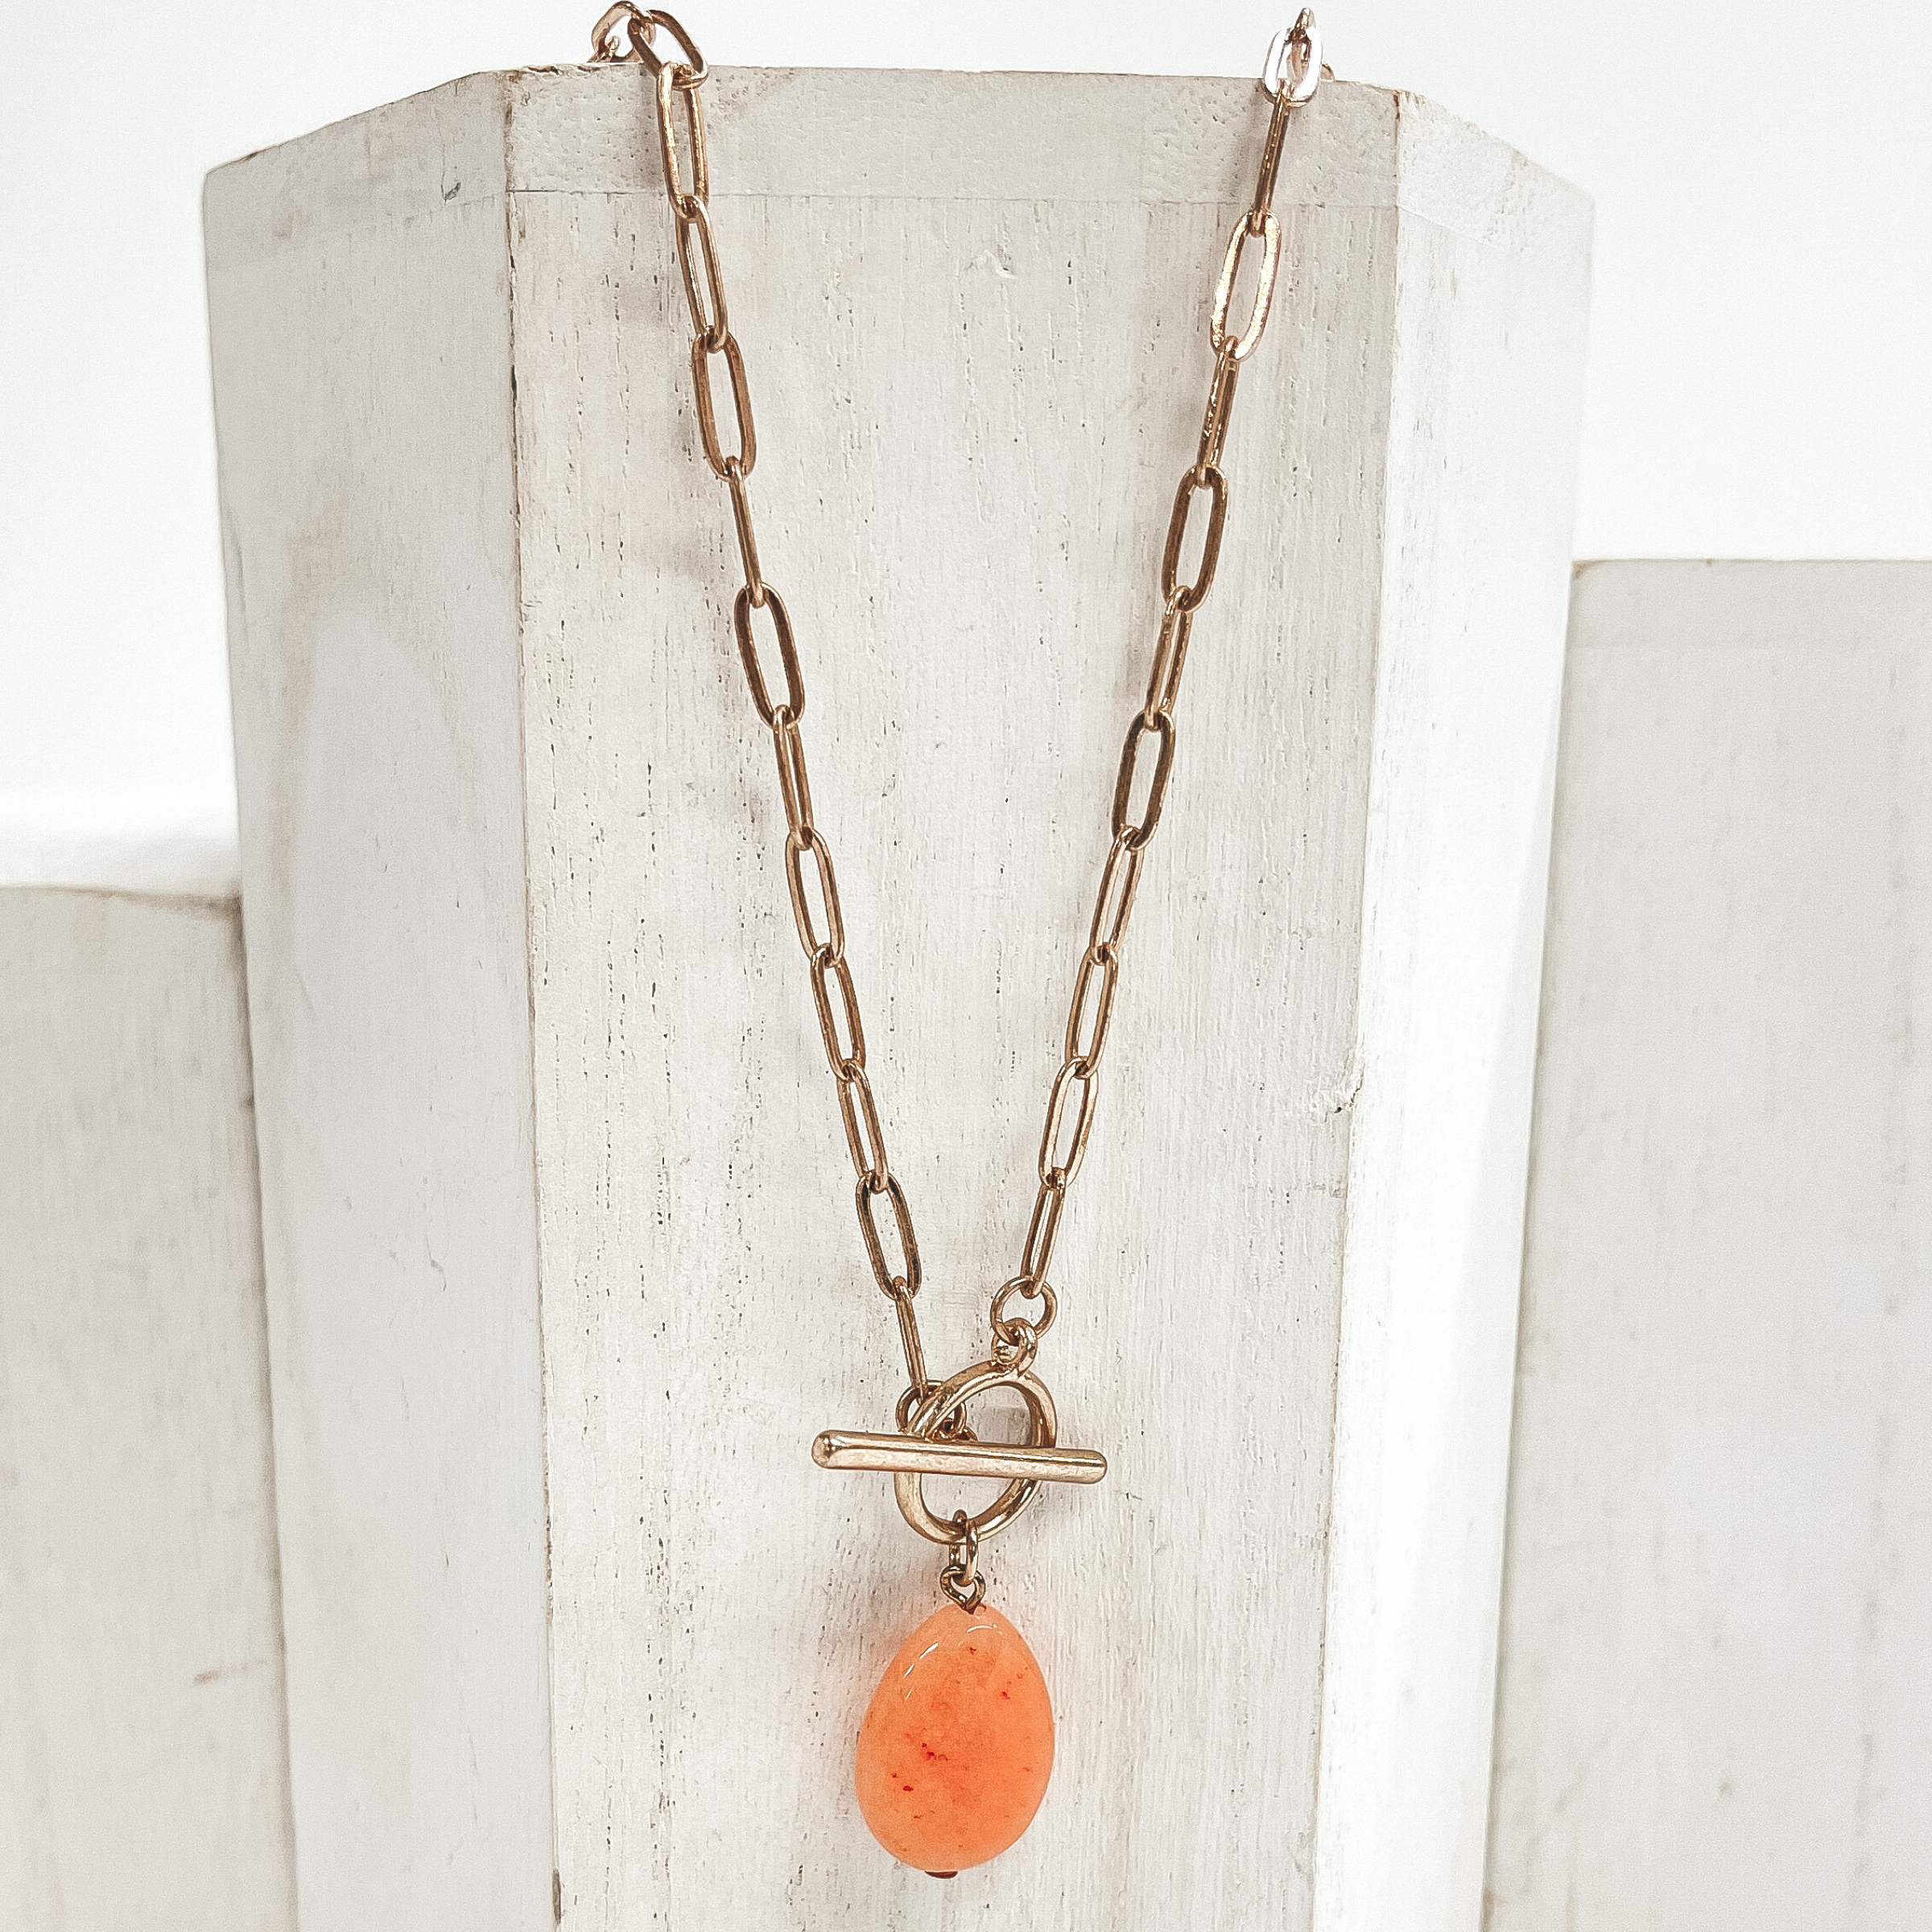 Gold paperclip chain necklace with toggle clasp and  natural stone teardrop pendant in coral orange.  Taken on  a white block and white background.